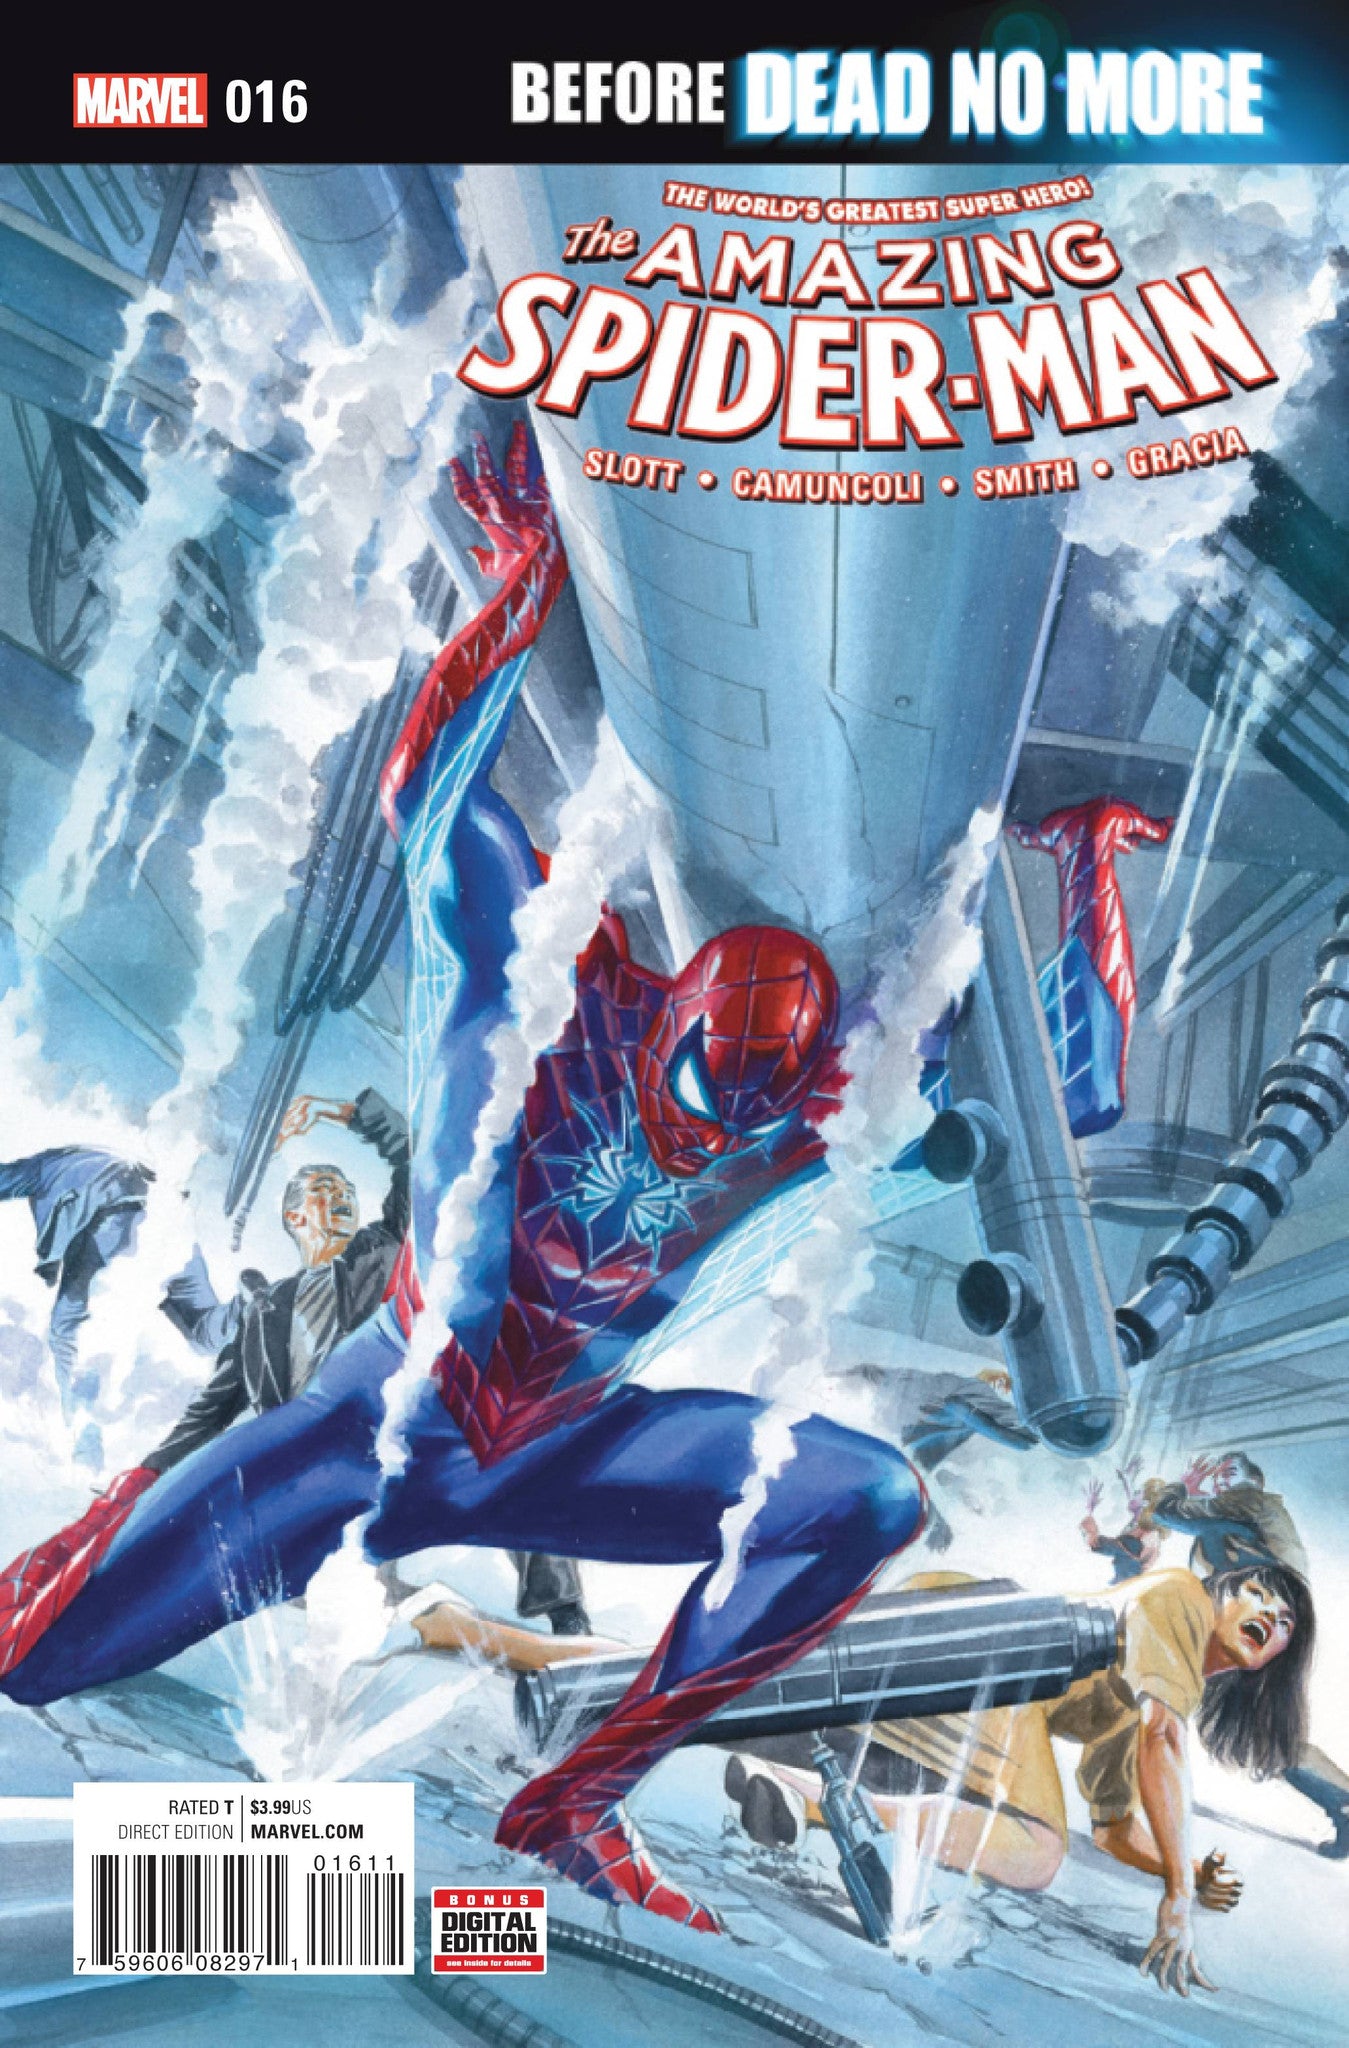 AMAZING SPIDER-MAN #16 BDNM COVER